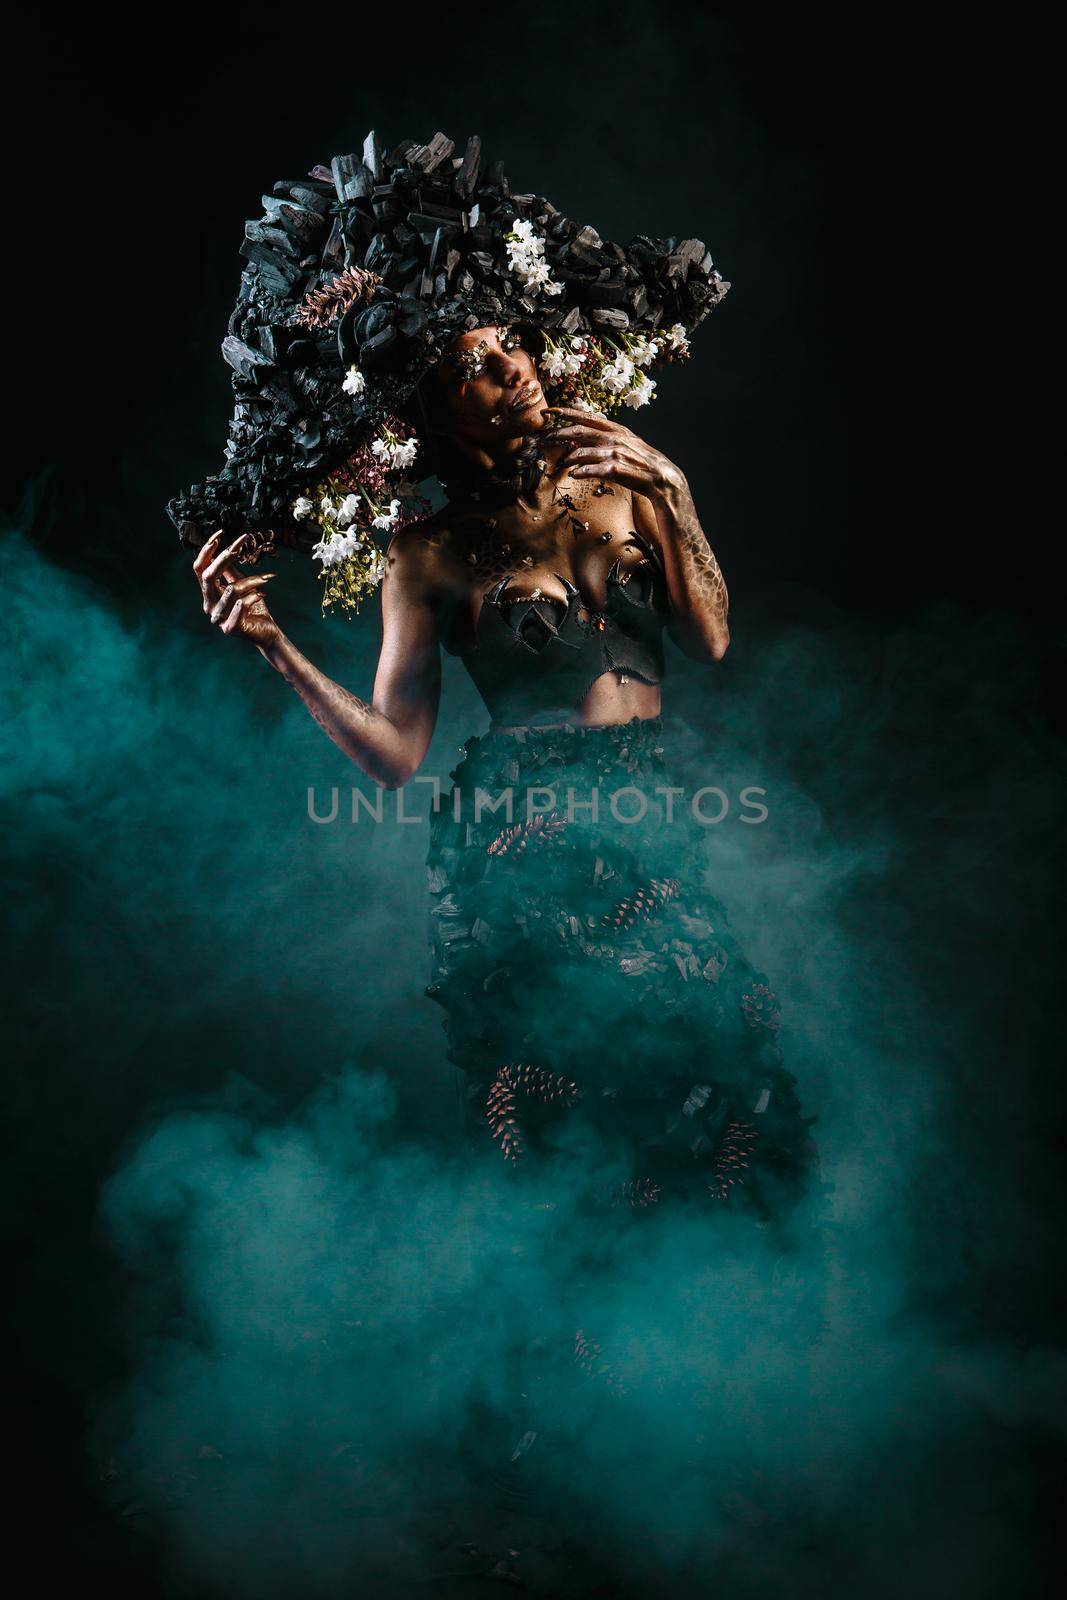 Portrait of a model in a headdress and dress made of coal. There is green smoke behind the model.